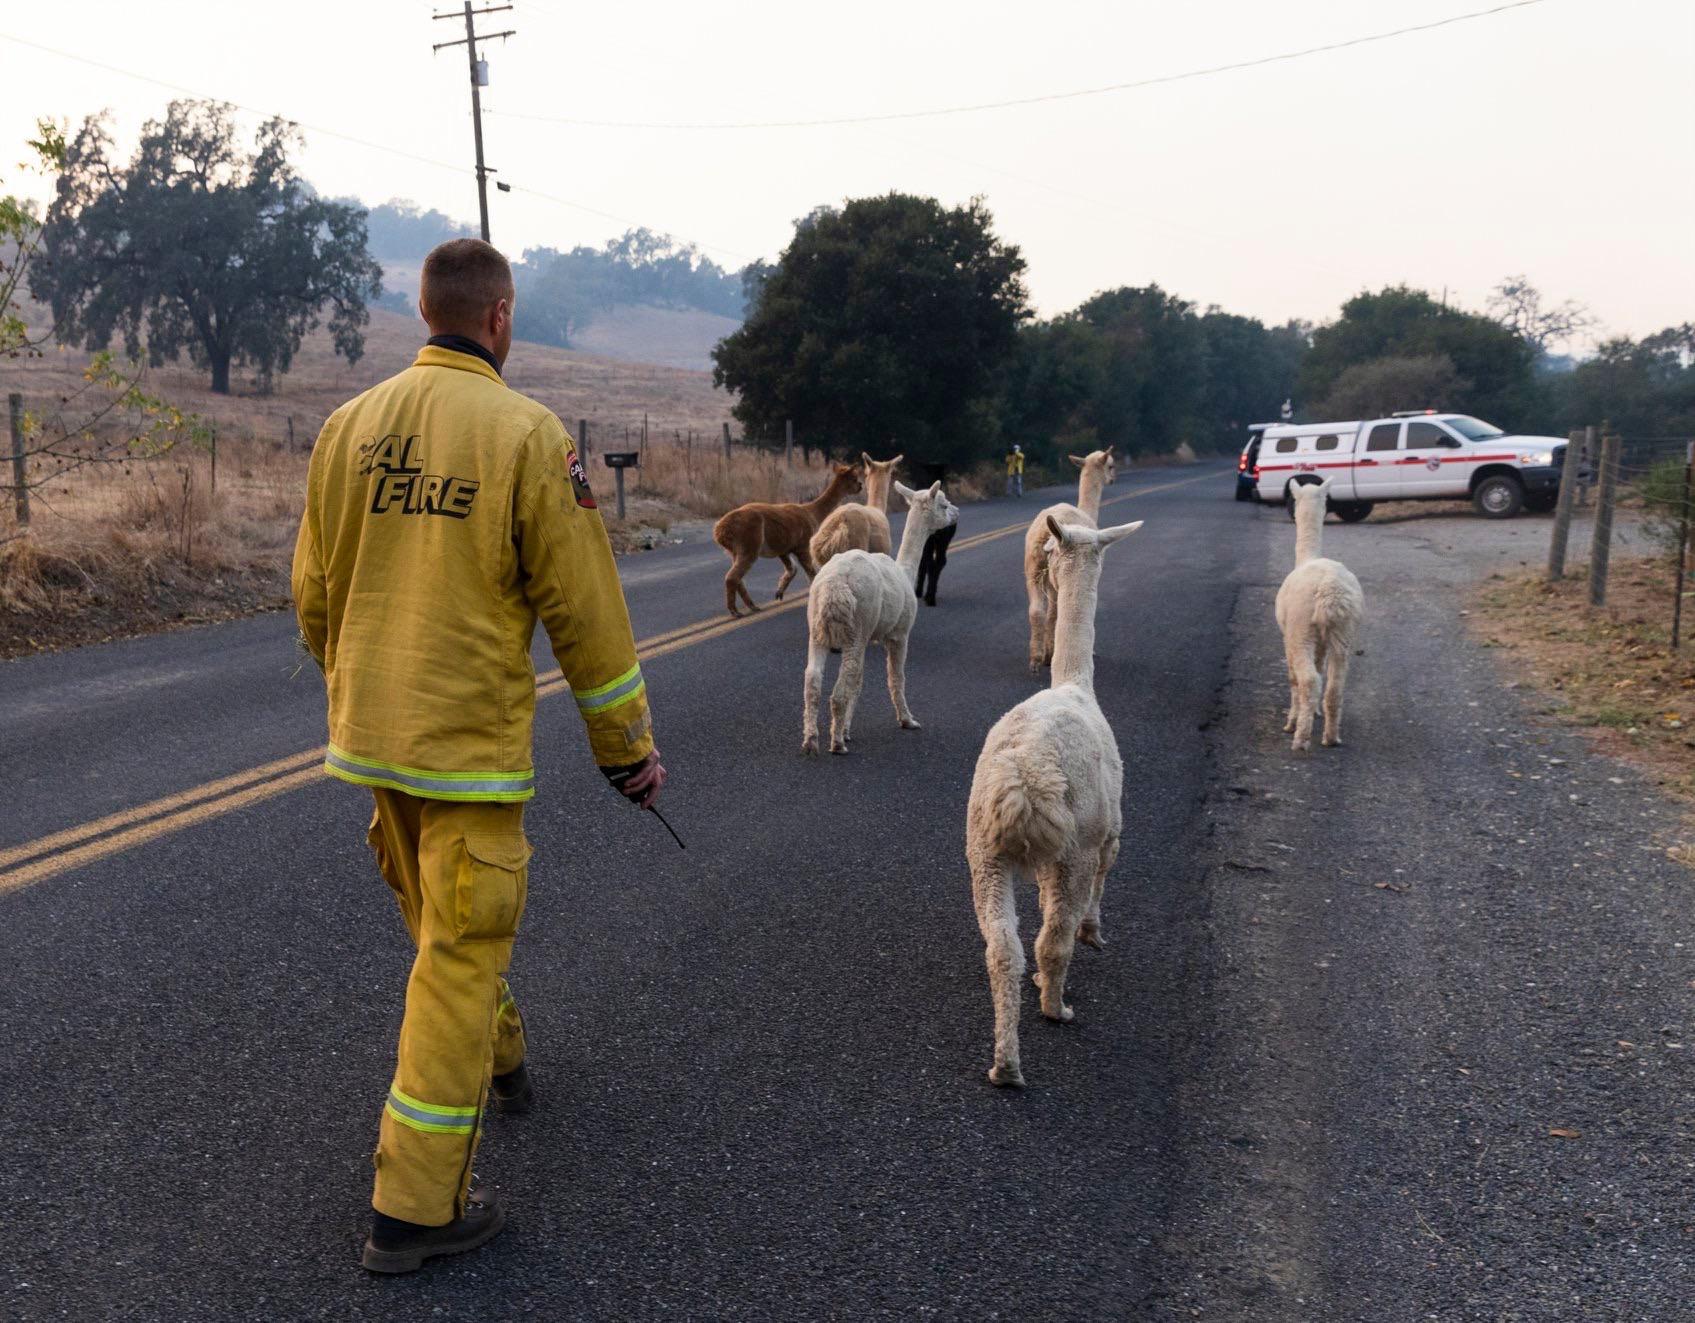 California firefighter herding a gaggle of Alpacas to safety.